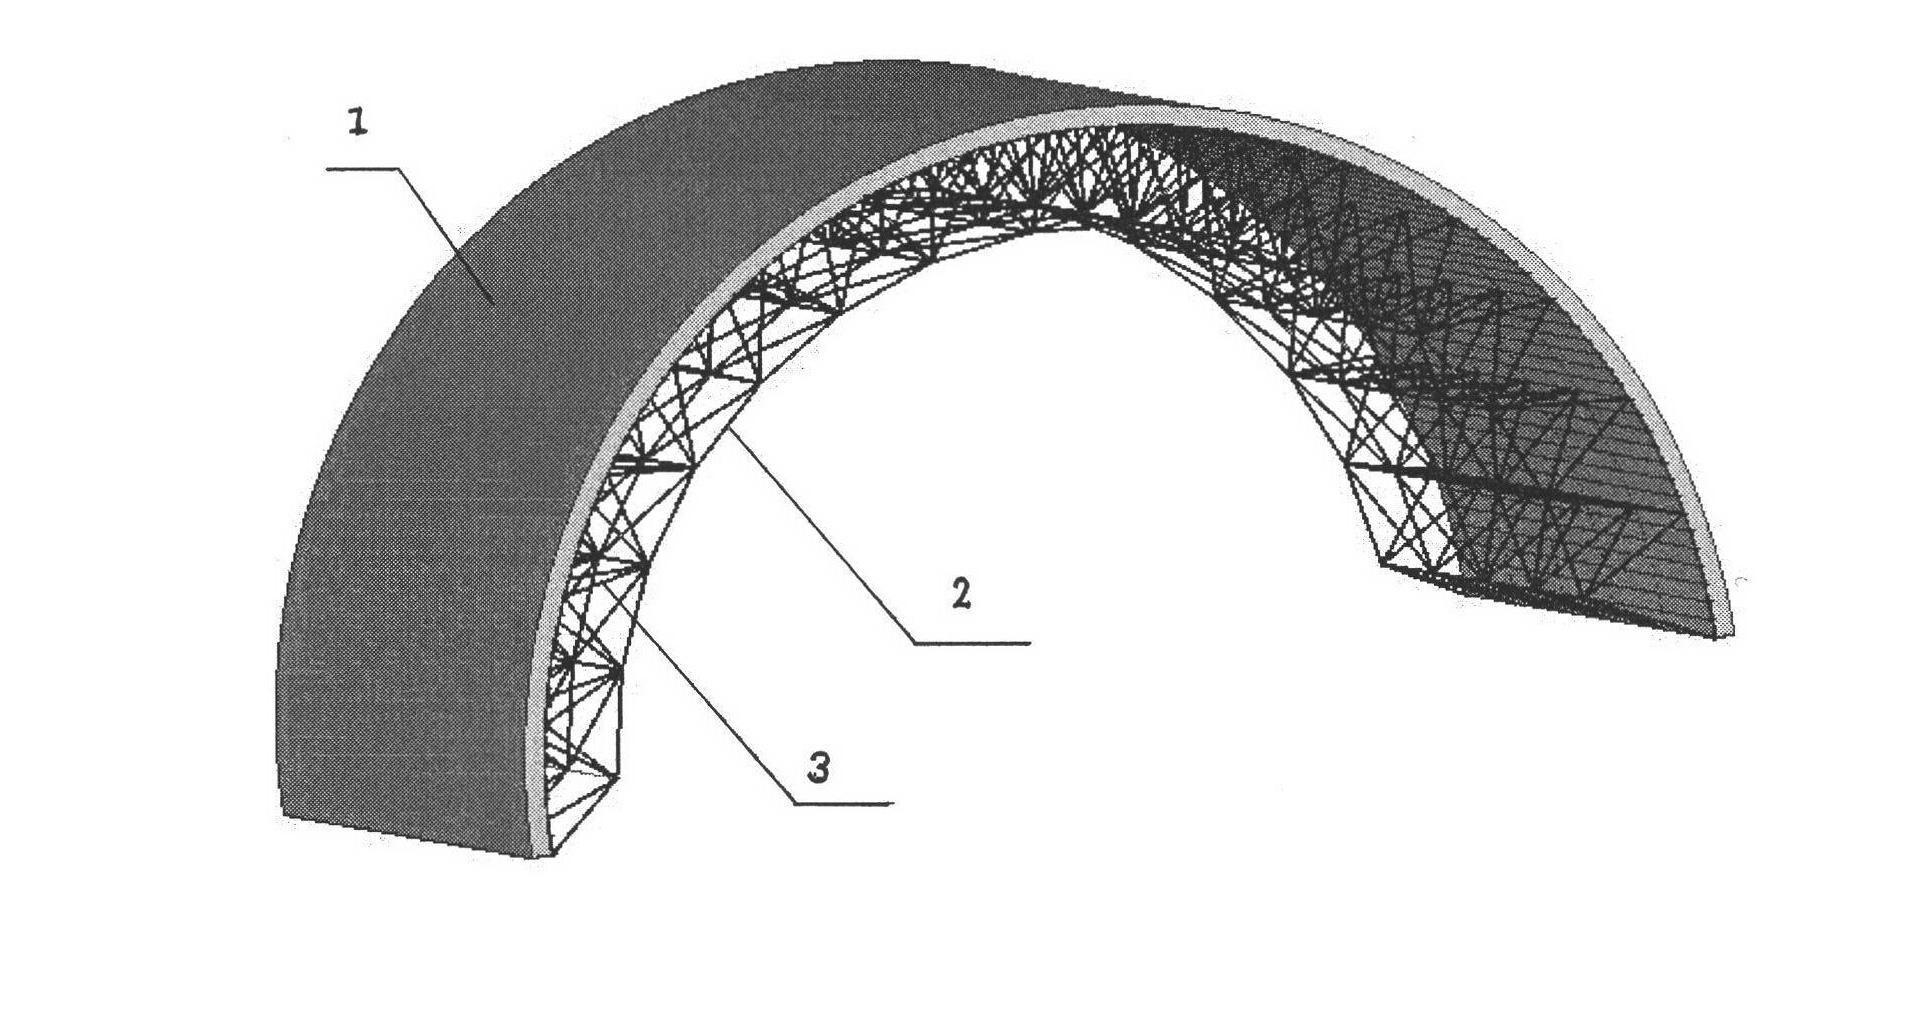 Spatial combined arched shell structure with two layers of cylindrical surfaces